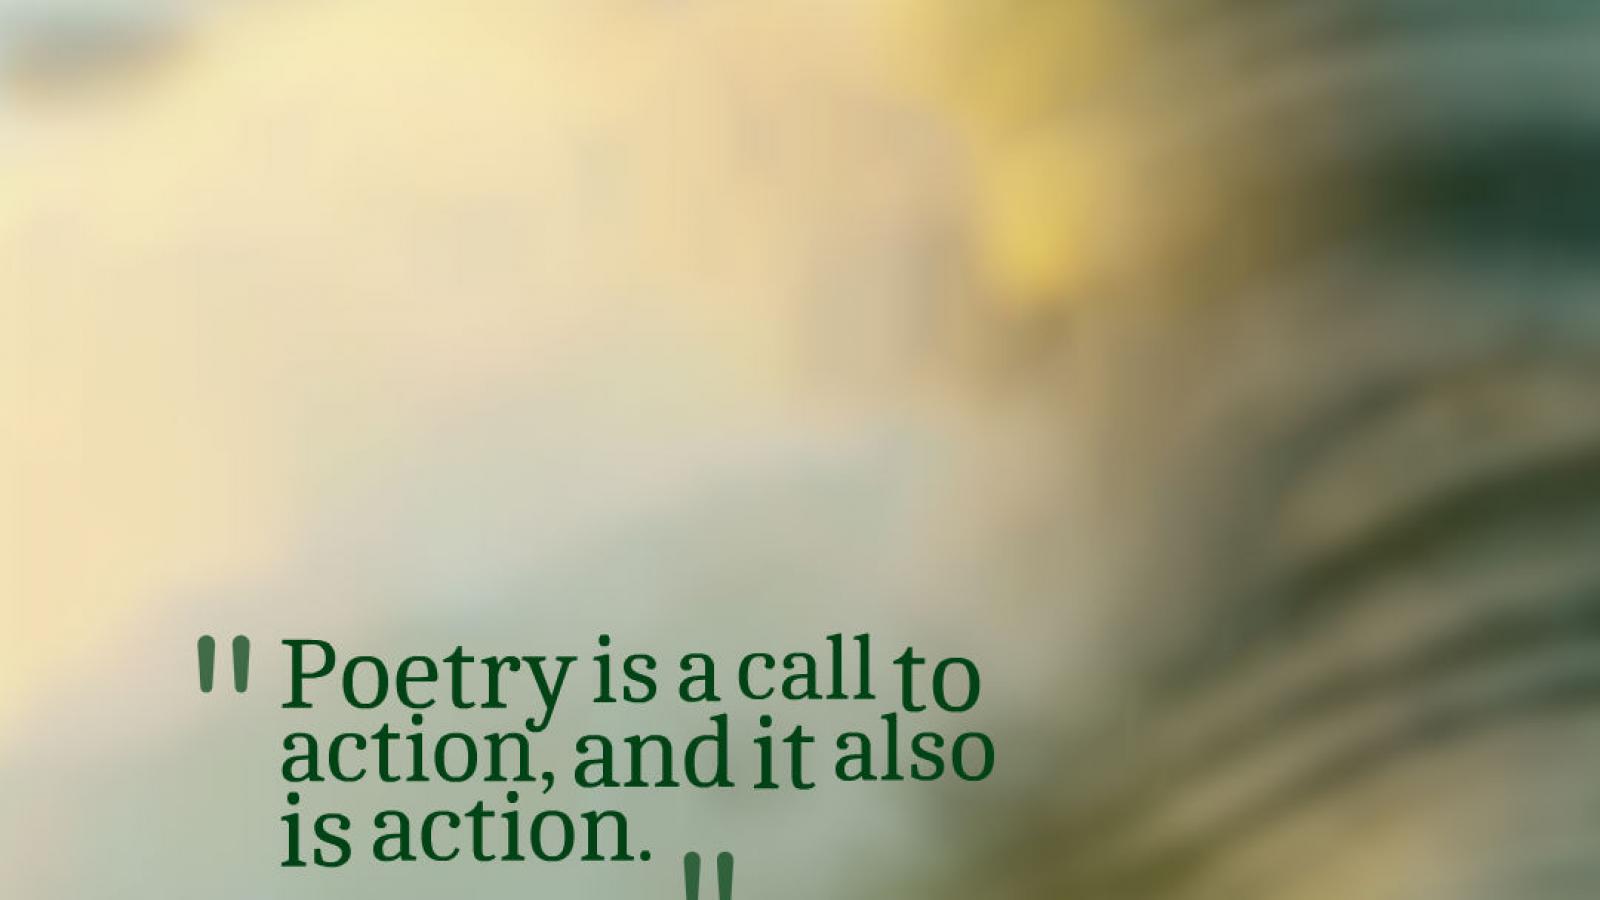 Quote from Poet Laureate of the United States Juan Felipe Herrera: Poetry is a call to action, and it also is action.